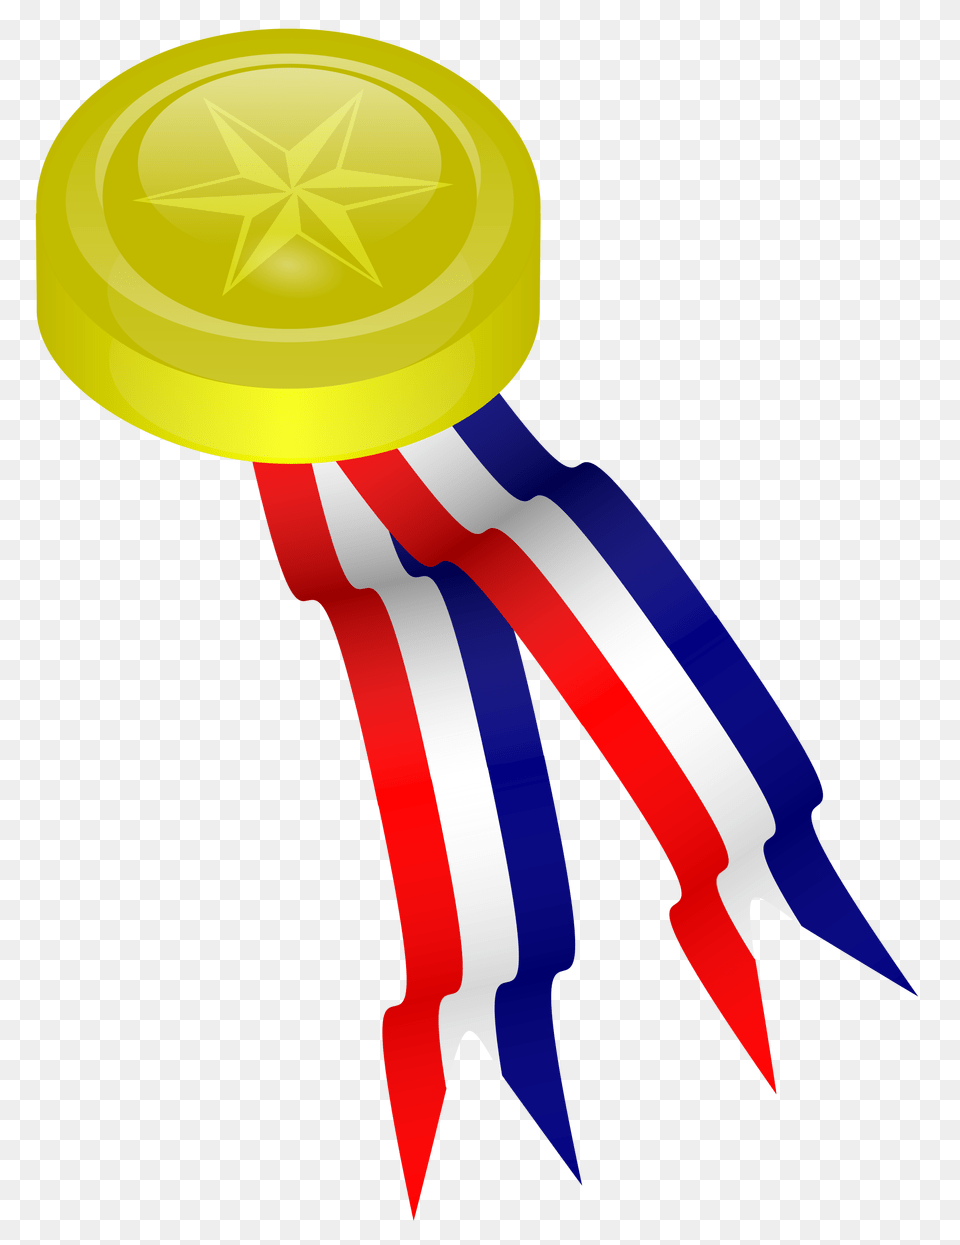 Maracas Picture Tambor Instrumentos Musical Colorido, Gold, Gold Medal, Trophy, Tape Free Transparent Png